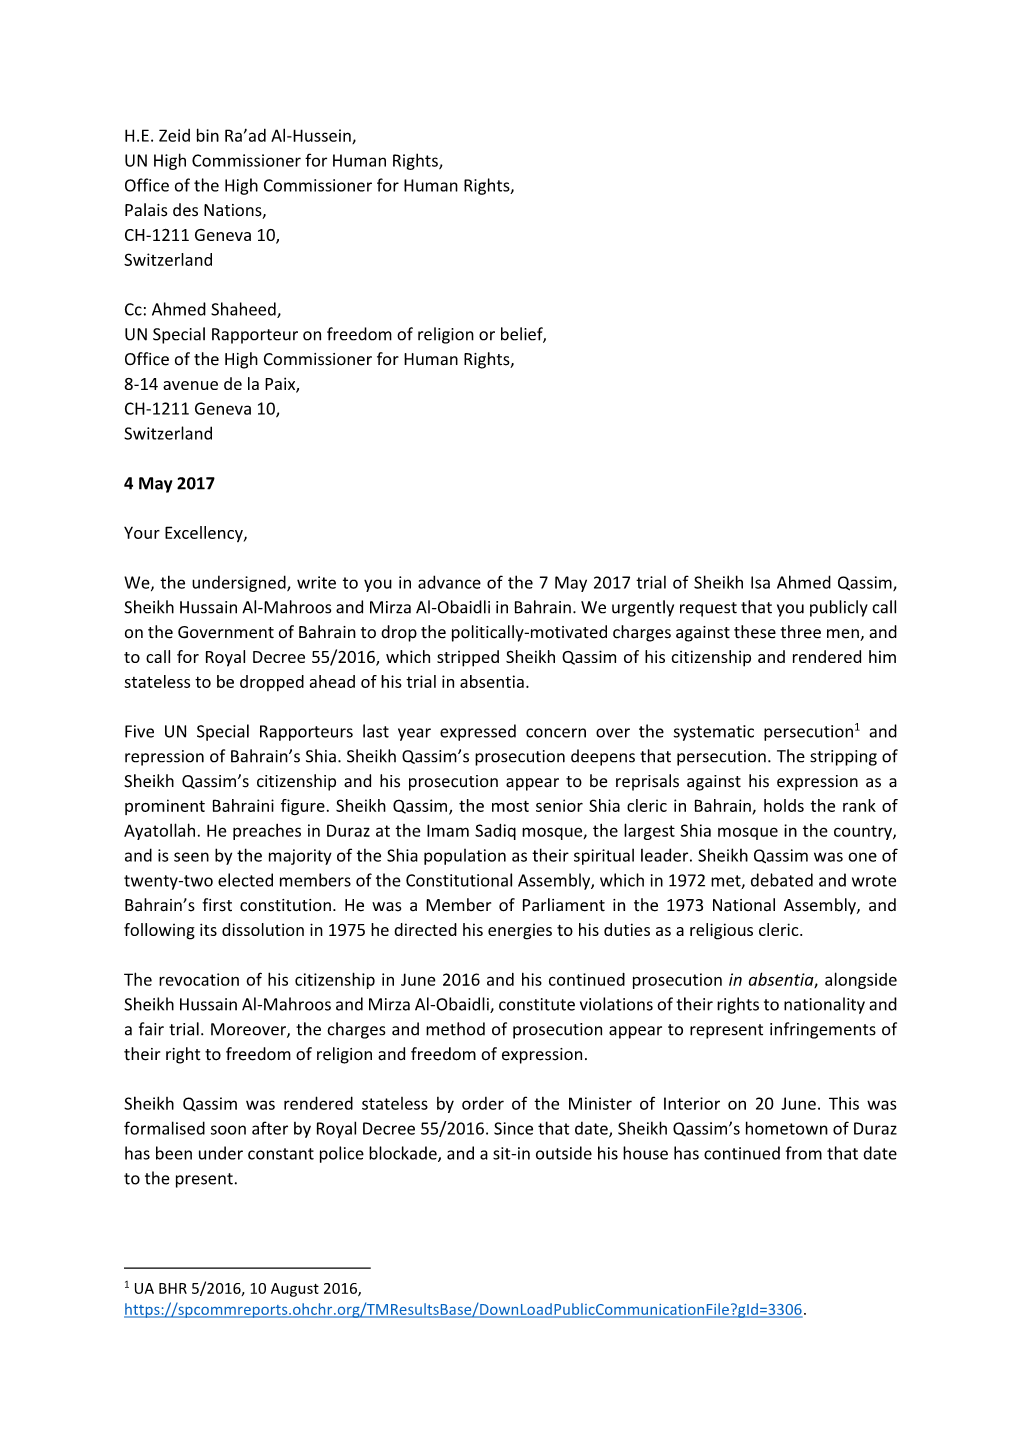 Letter to United Nations